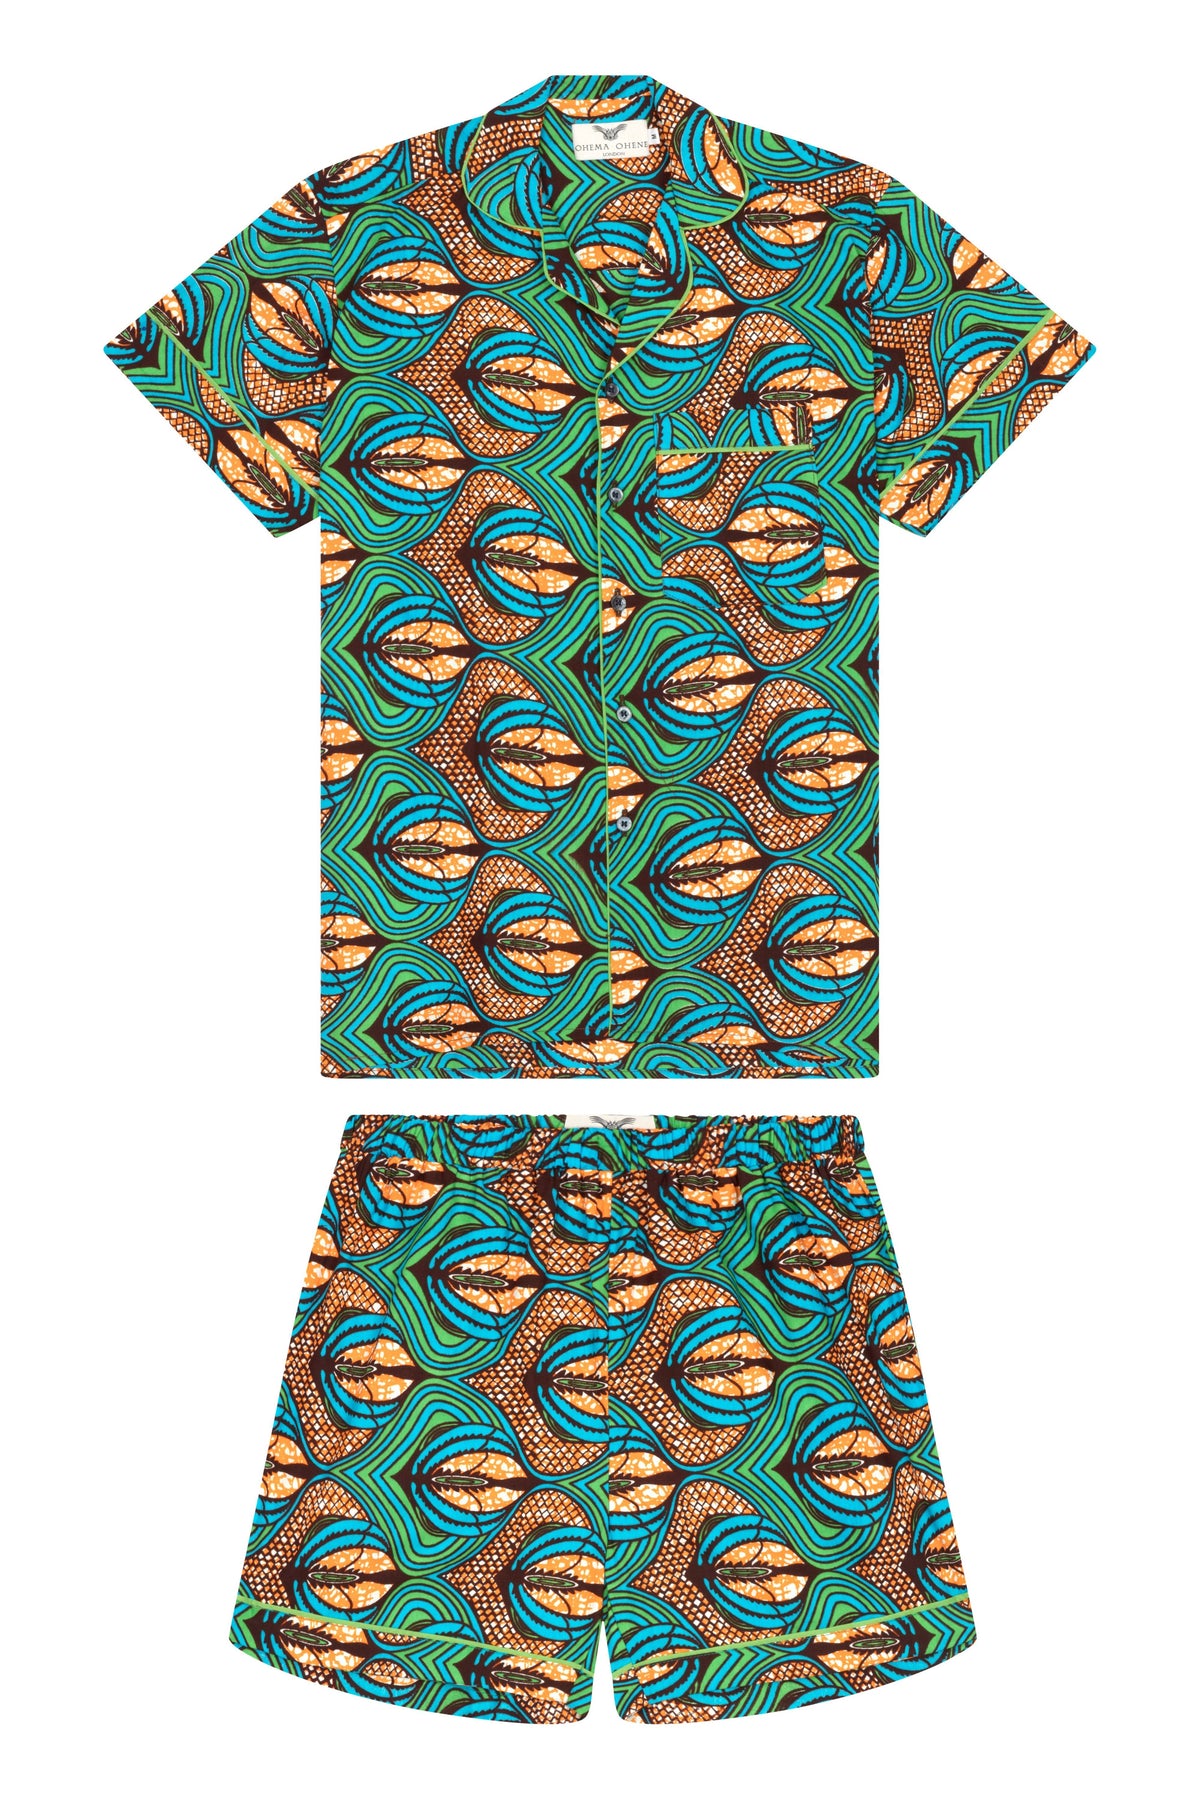 African print Pyjamas SS-Green Feather - OHEMA OHENE AFRICAN INSPIRED FASHION